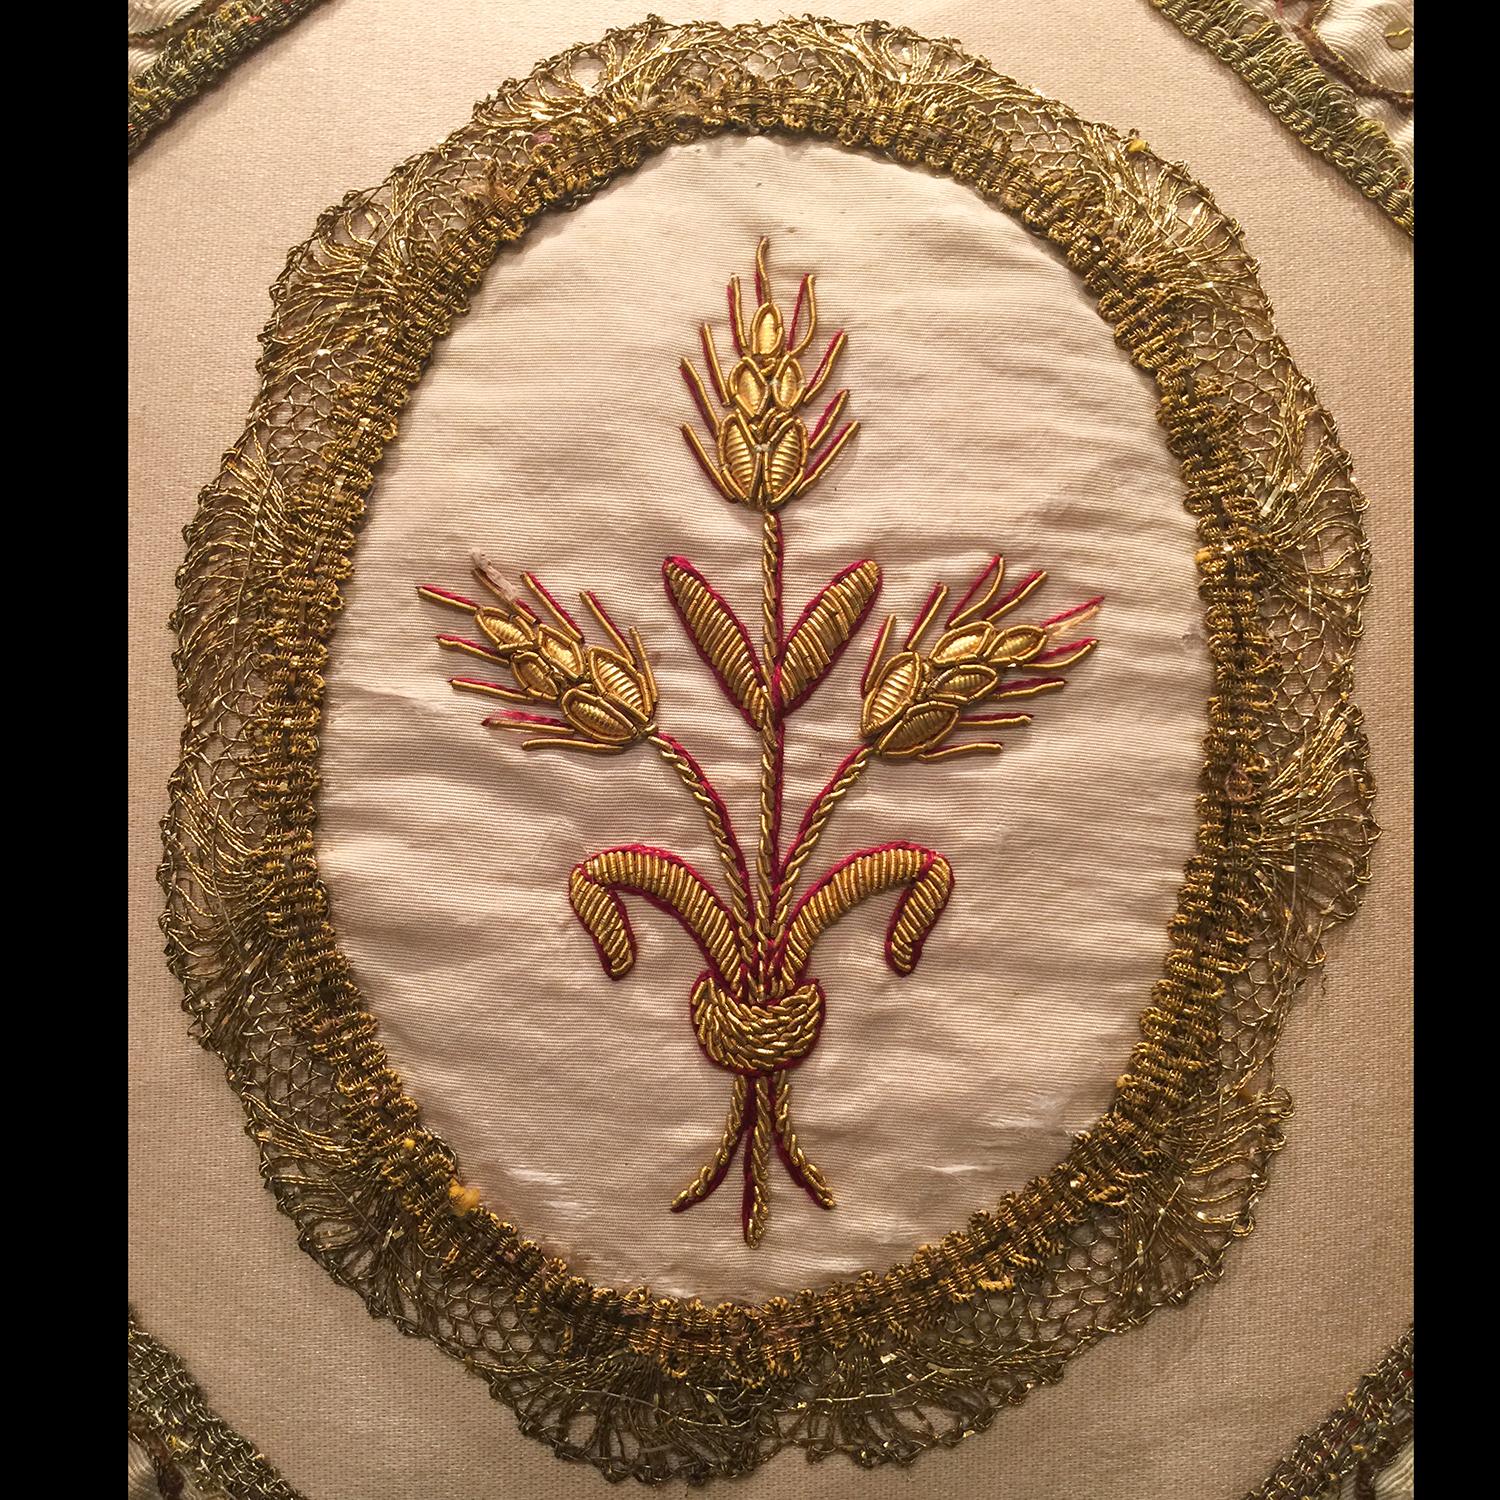 Central medallion of 19th century Italian wheat embroidery is bordered by 18th century Italian shell shaped handmade trim woven throughout with real gold thread. The four triangular shaped 18th century Italian corner fragments are connected by four